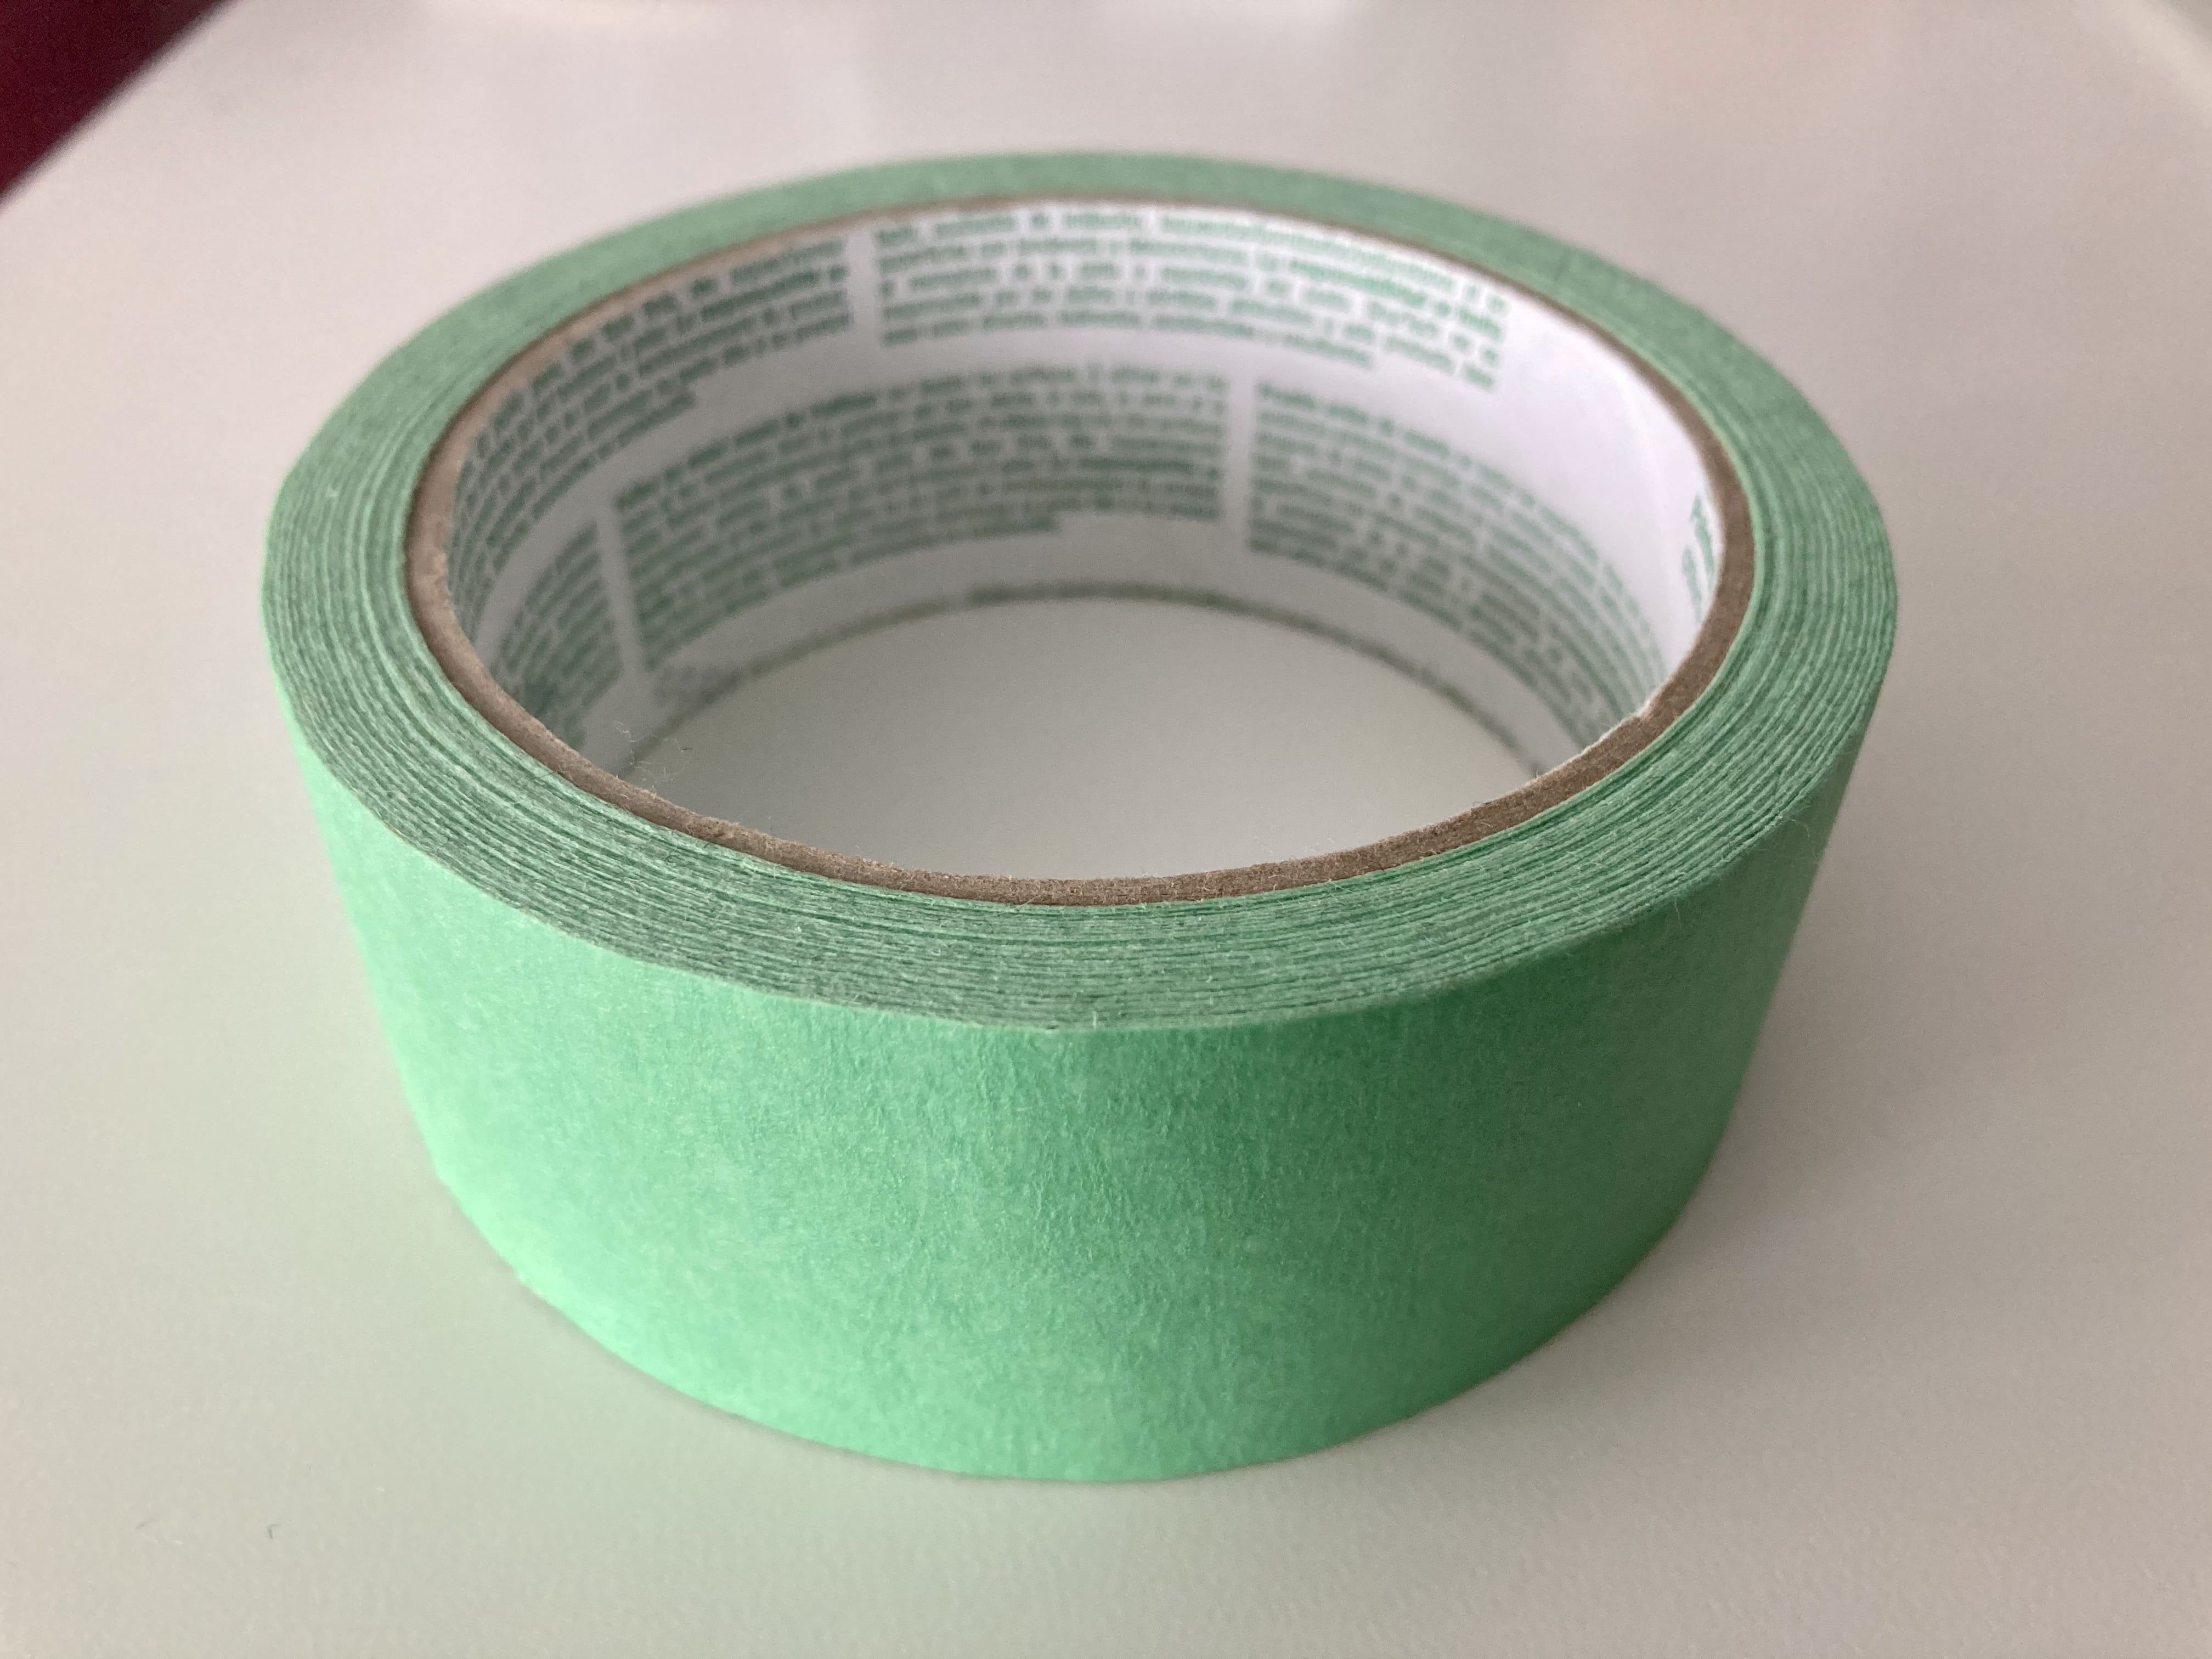 A closeup of a roll of green painter’s tape